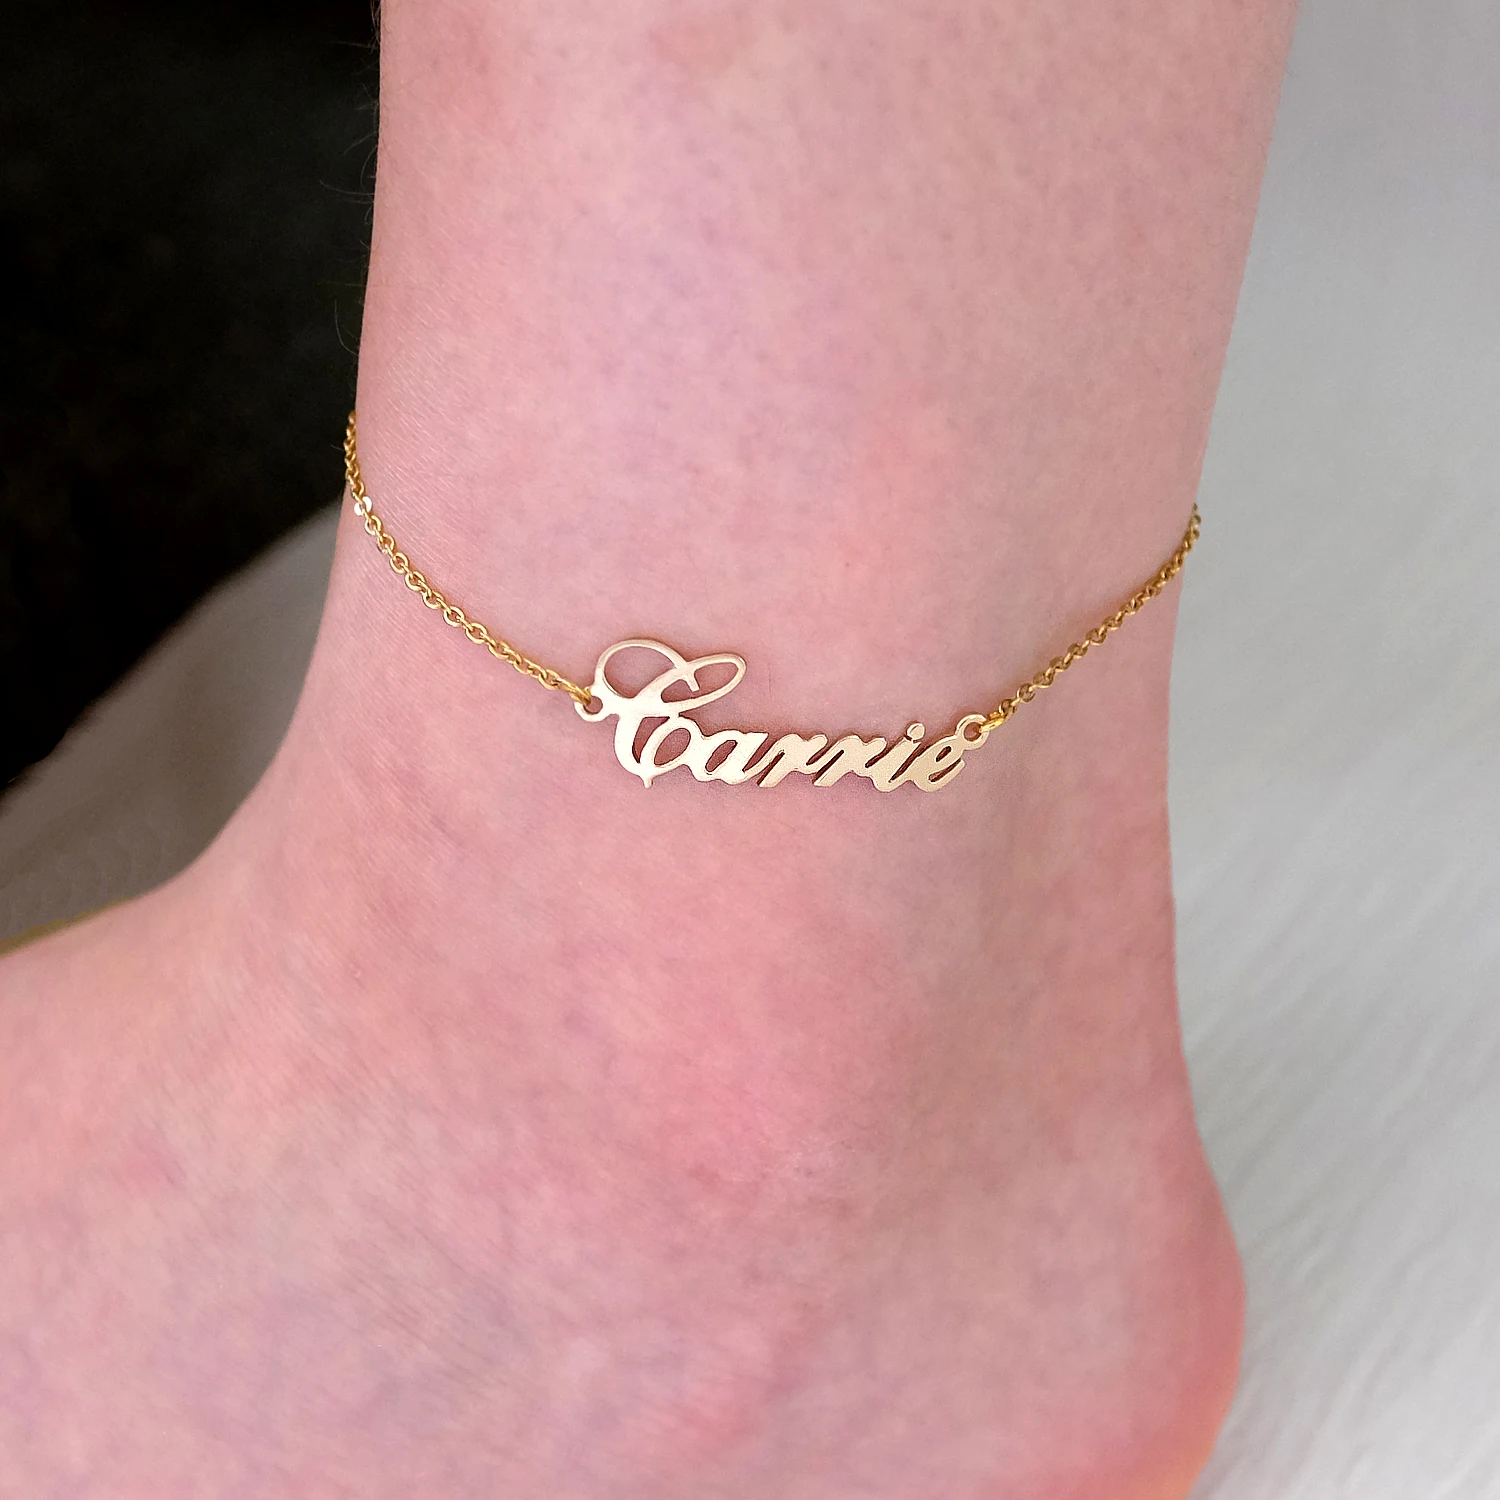 

Personalized Name Anklet,Custom Anklet,Foot Jewelry,Nameplate Anklet,Girlfriend Gift,Birthday Gift